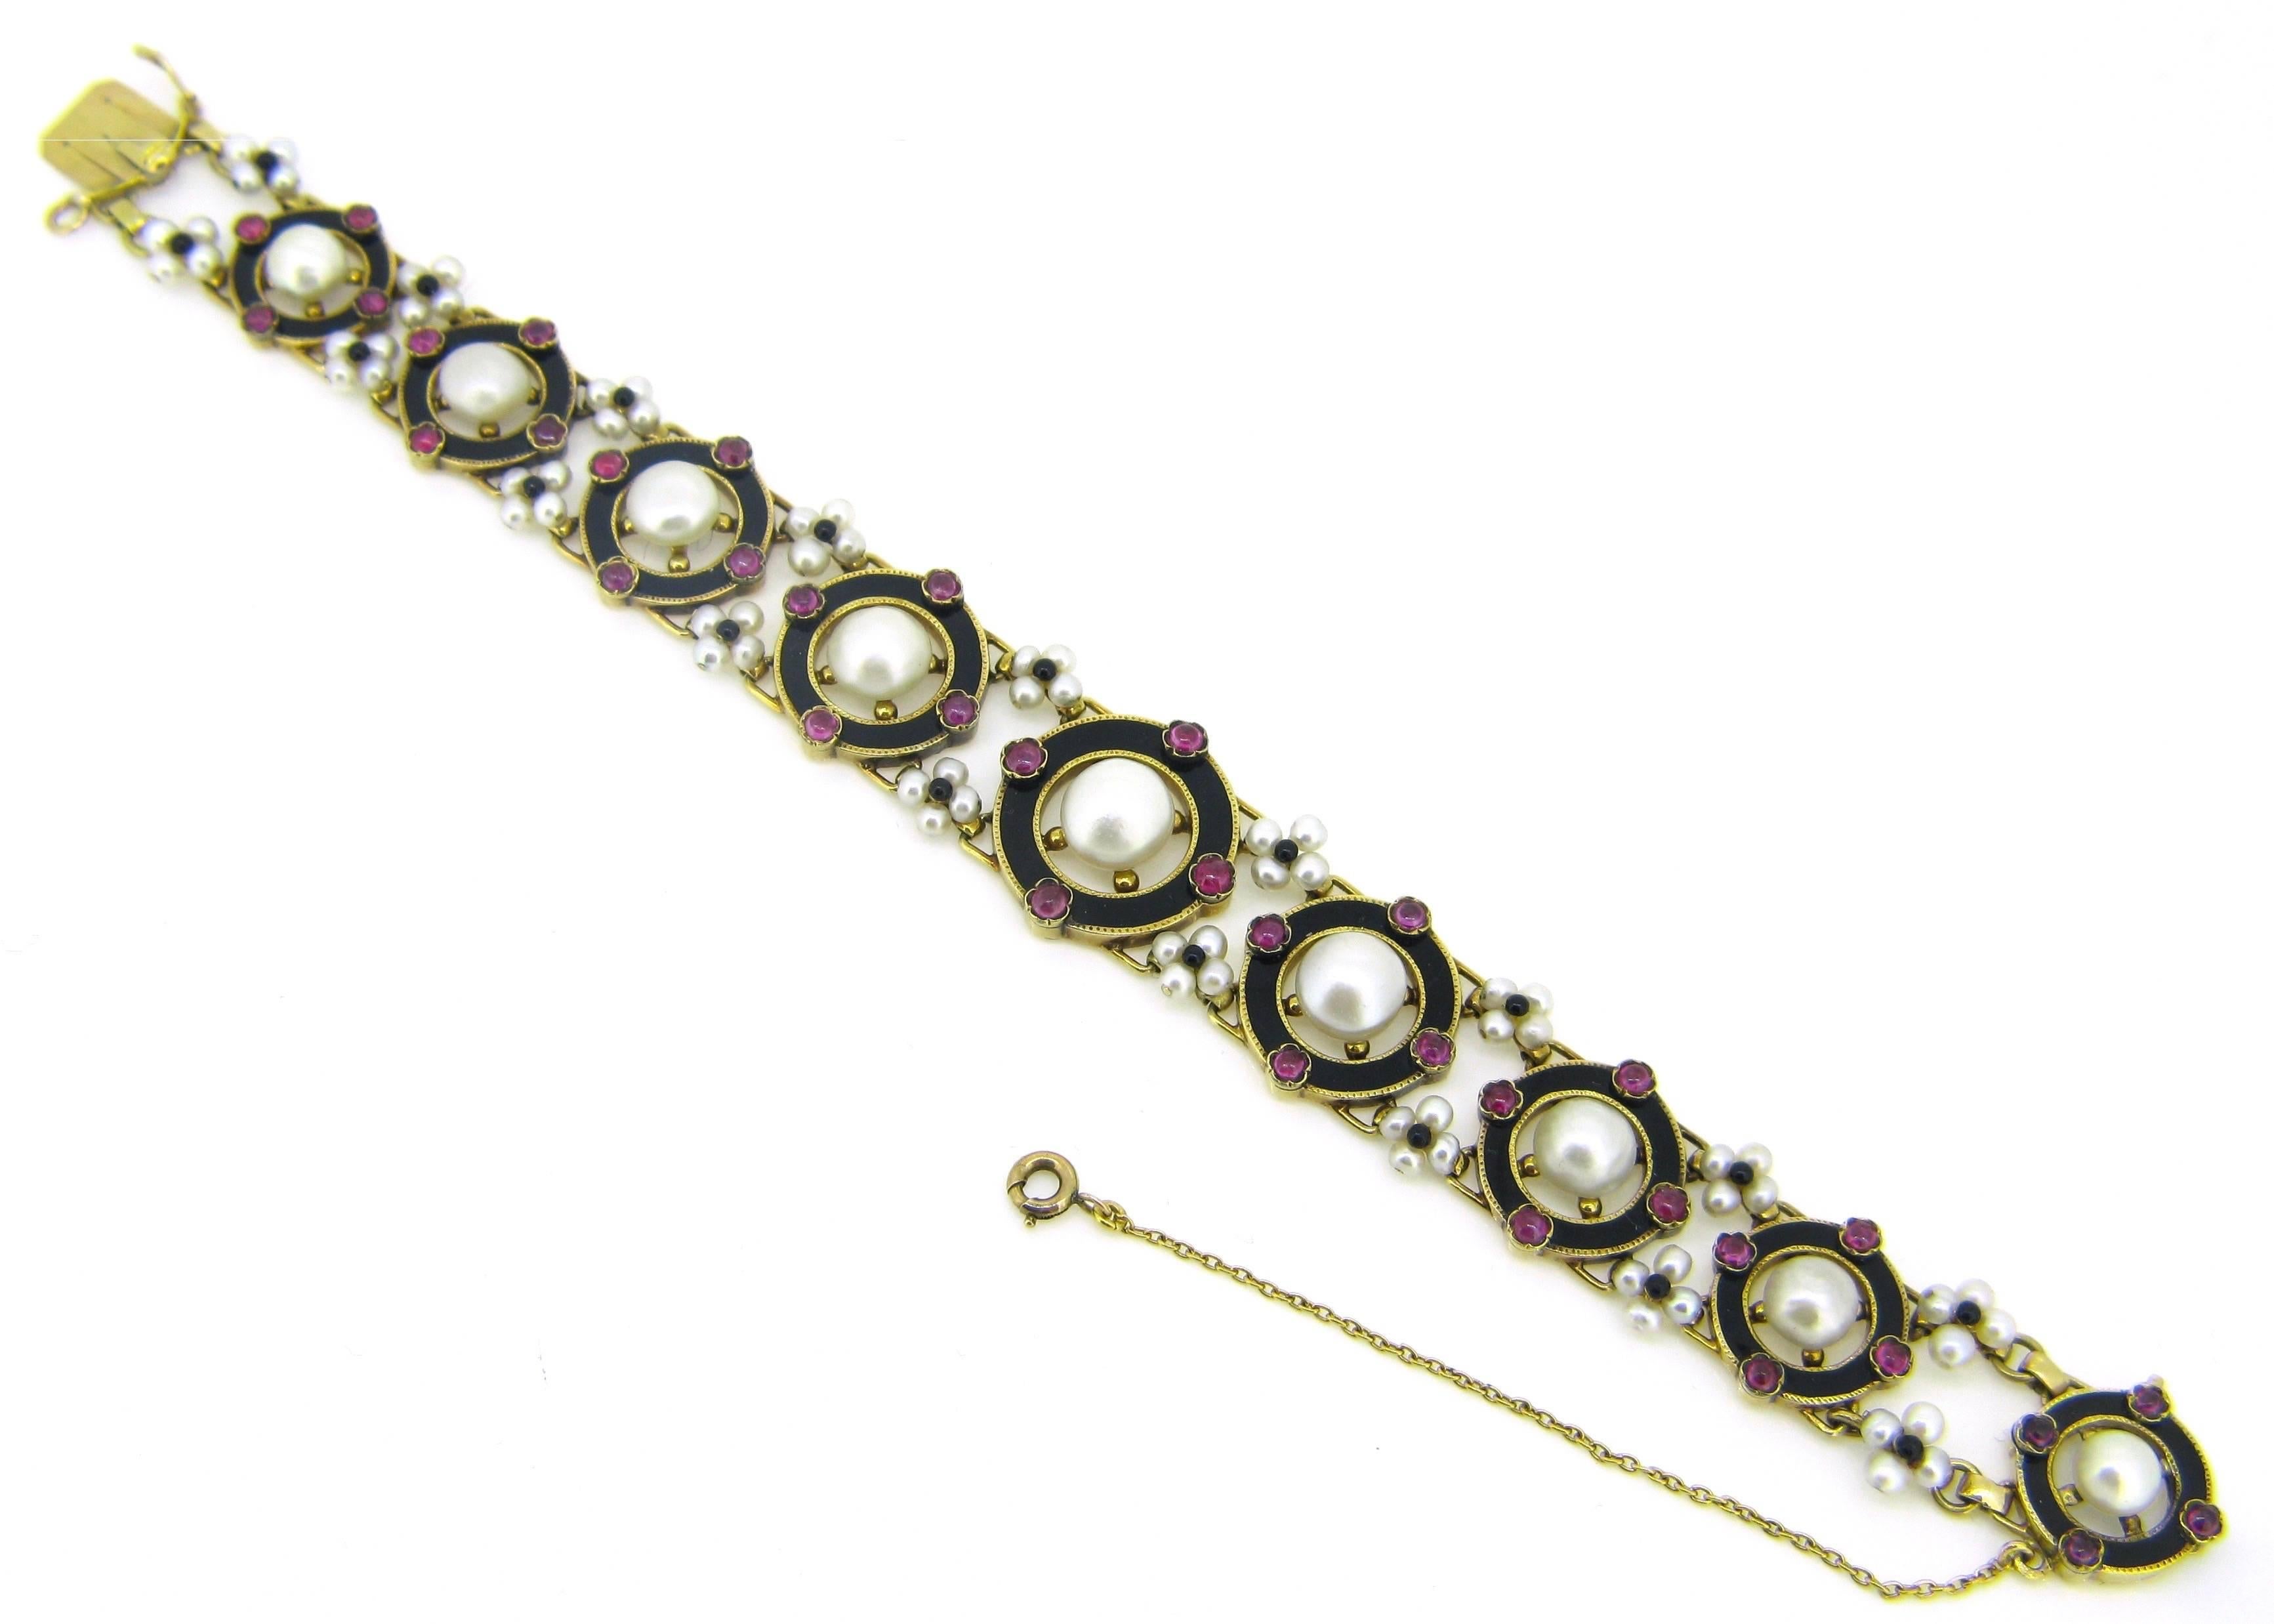 This fabulous bracelet is a real testimony of Victorian period. There are 9 circles, centered with naturals pearls, surrounded with black enamel and with 4 cabochon cut rubies on the cardinal points for a total of 36 rubies. They are interspersed